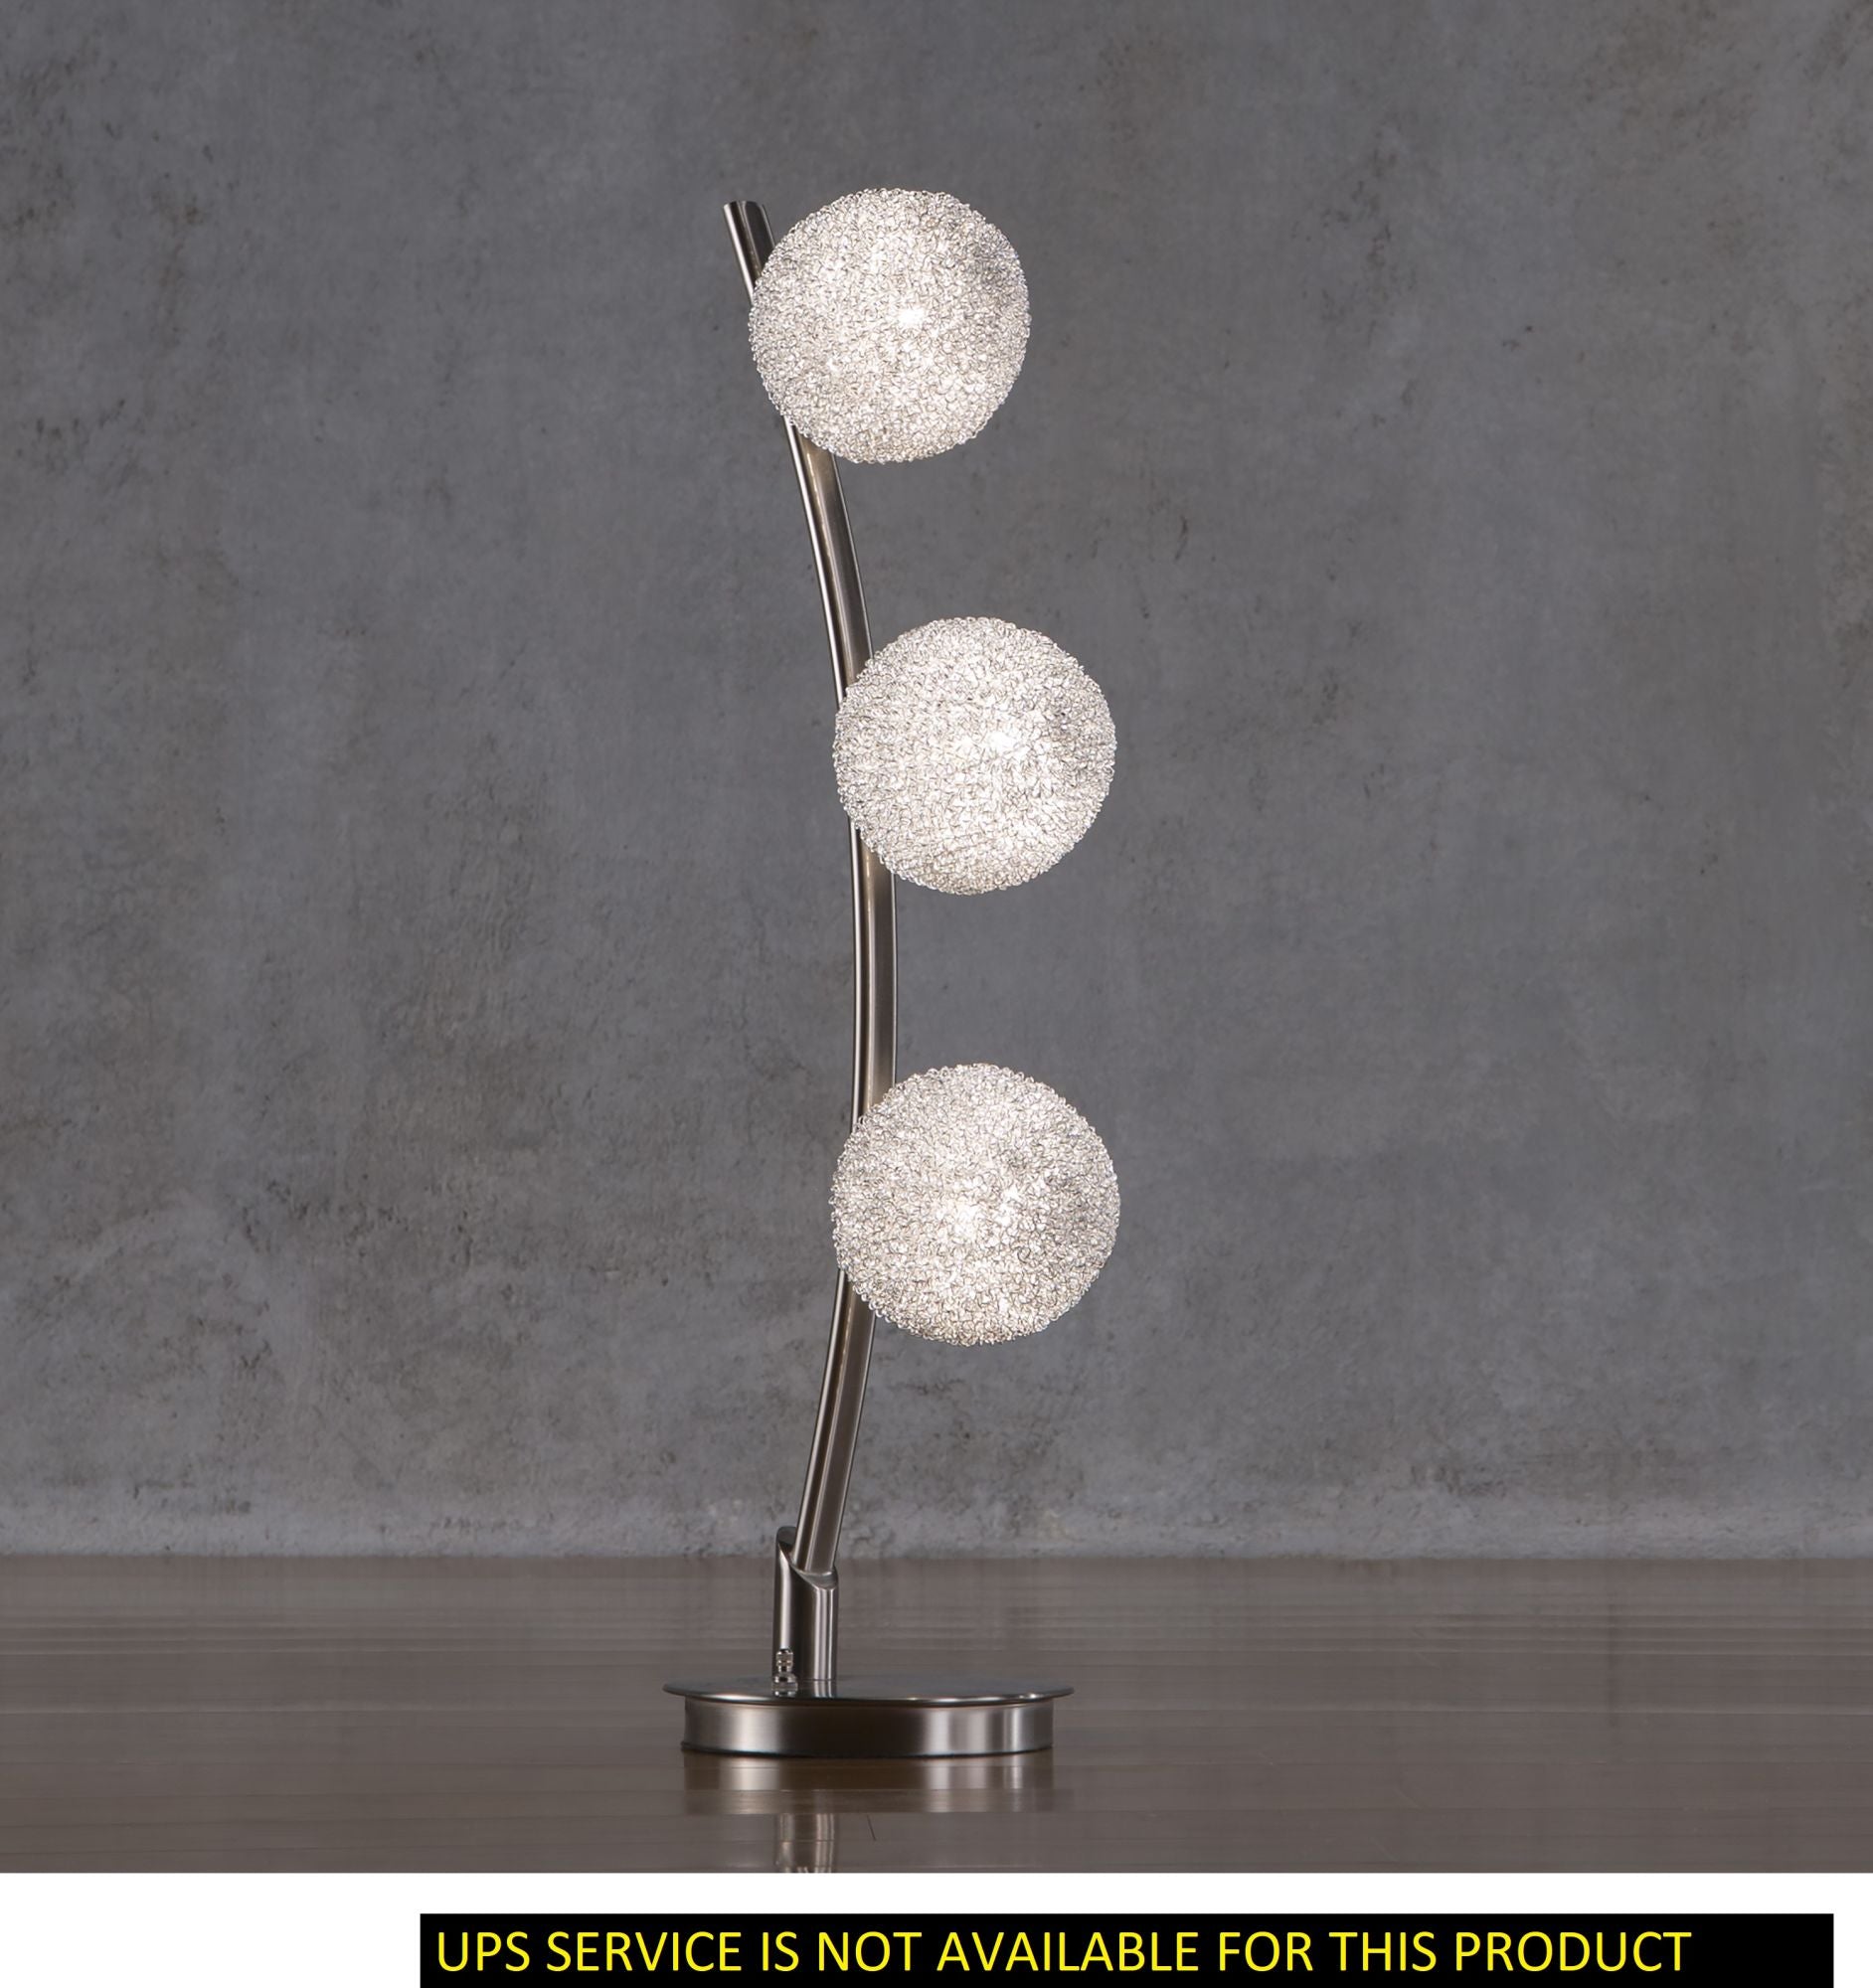 Modern Home Decor Table Light 1pc Curved Stand Satin Nickel Finish Bedroom Living Room, 3 Wire-Wrapped Balls